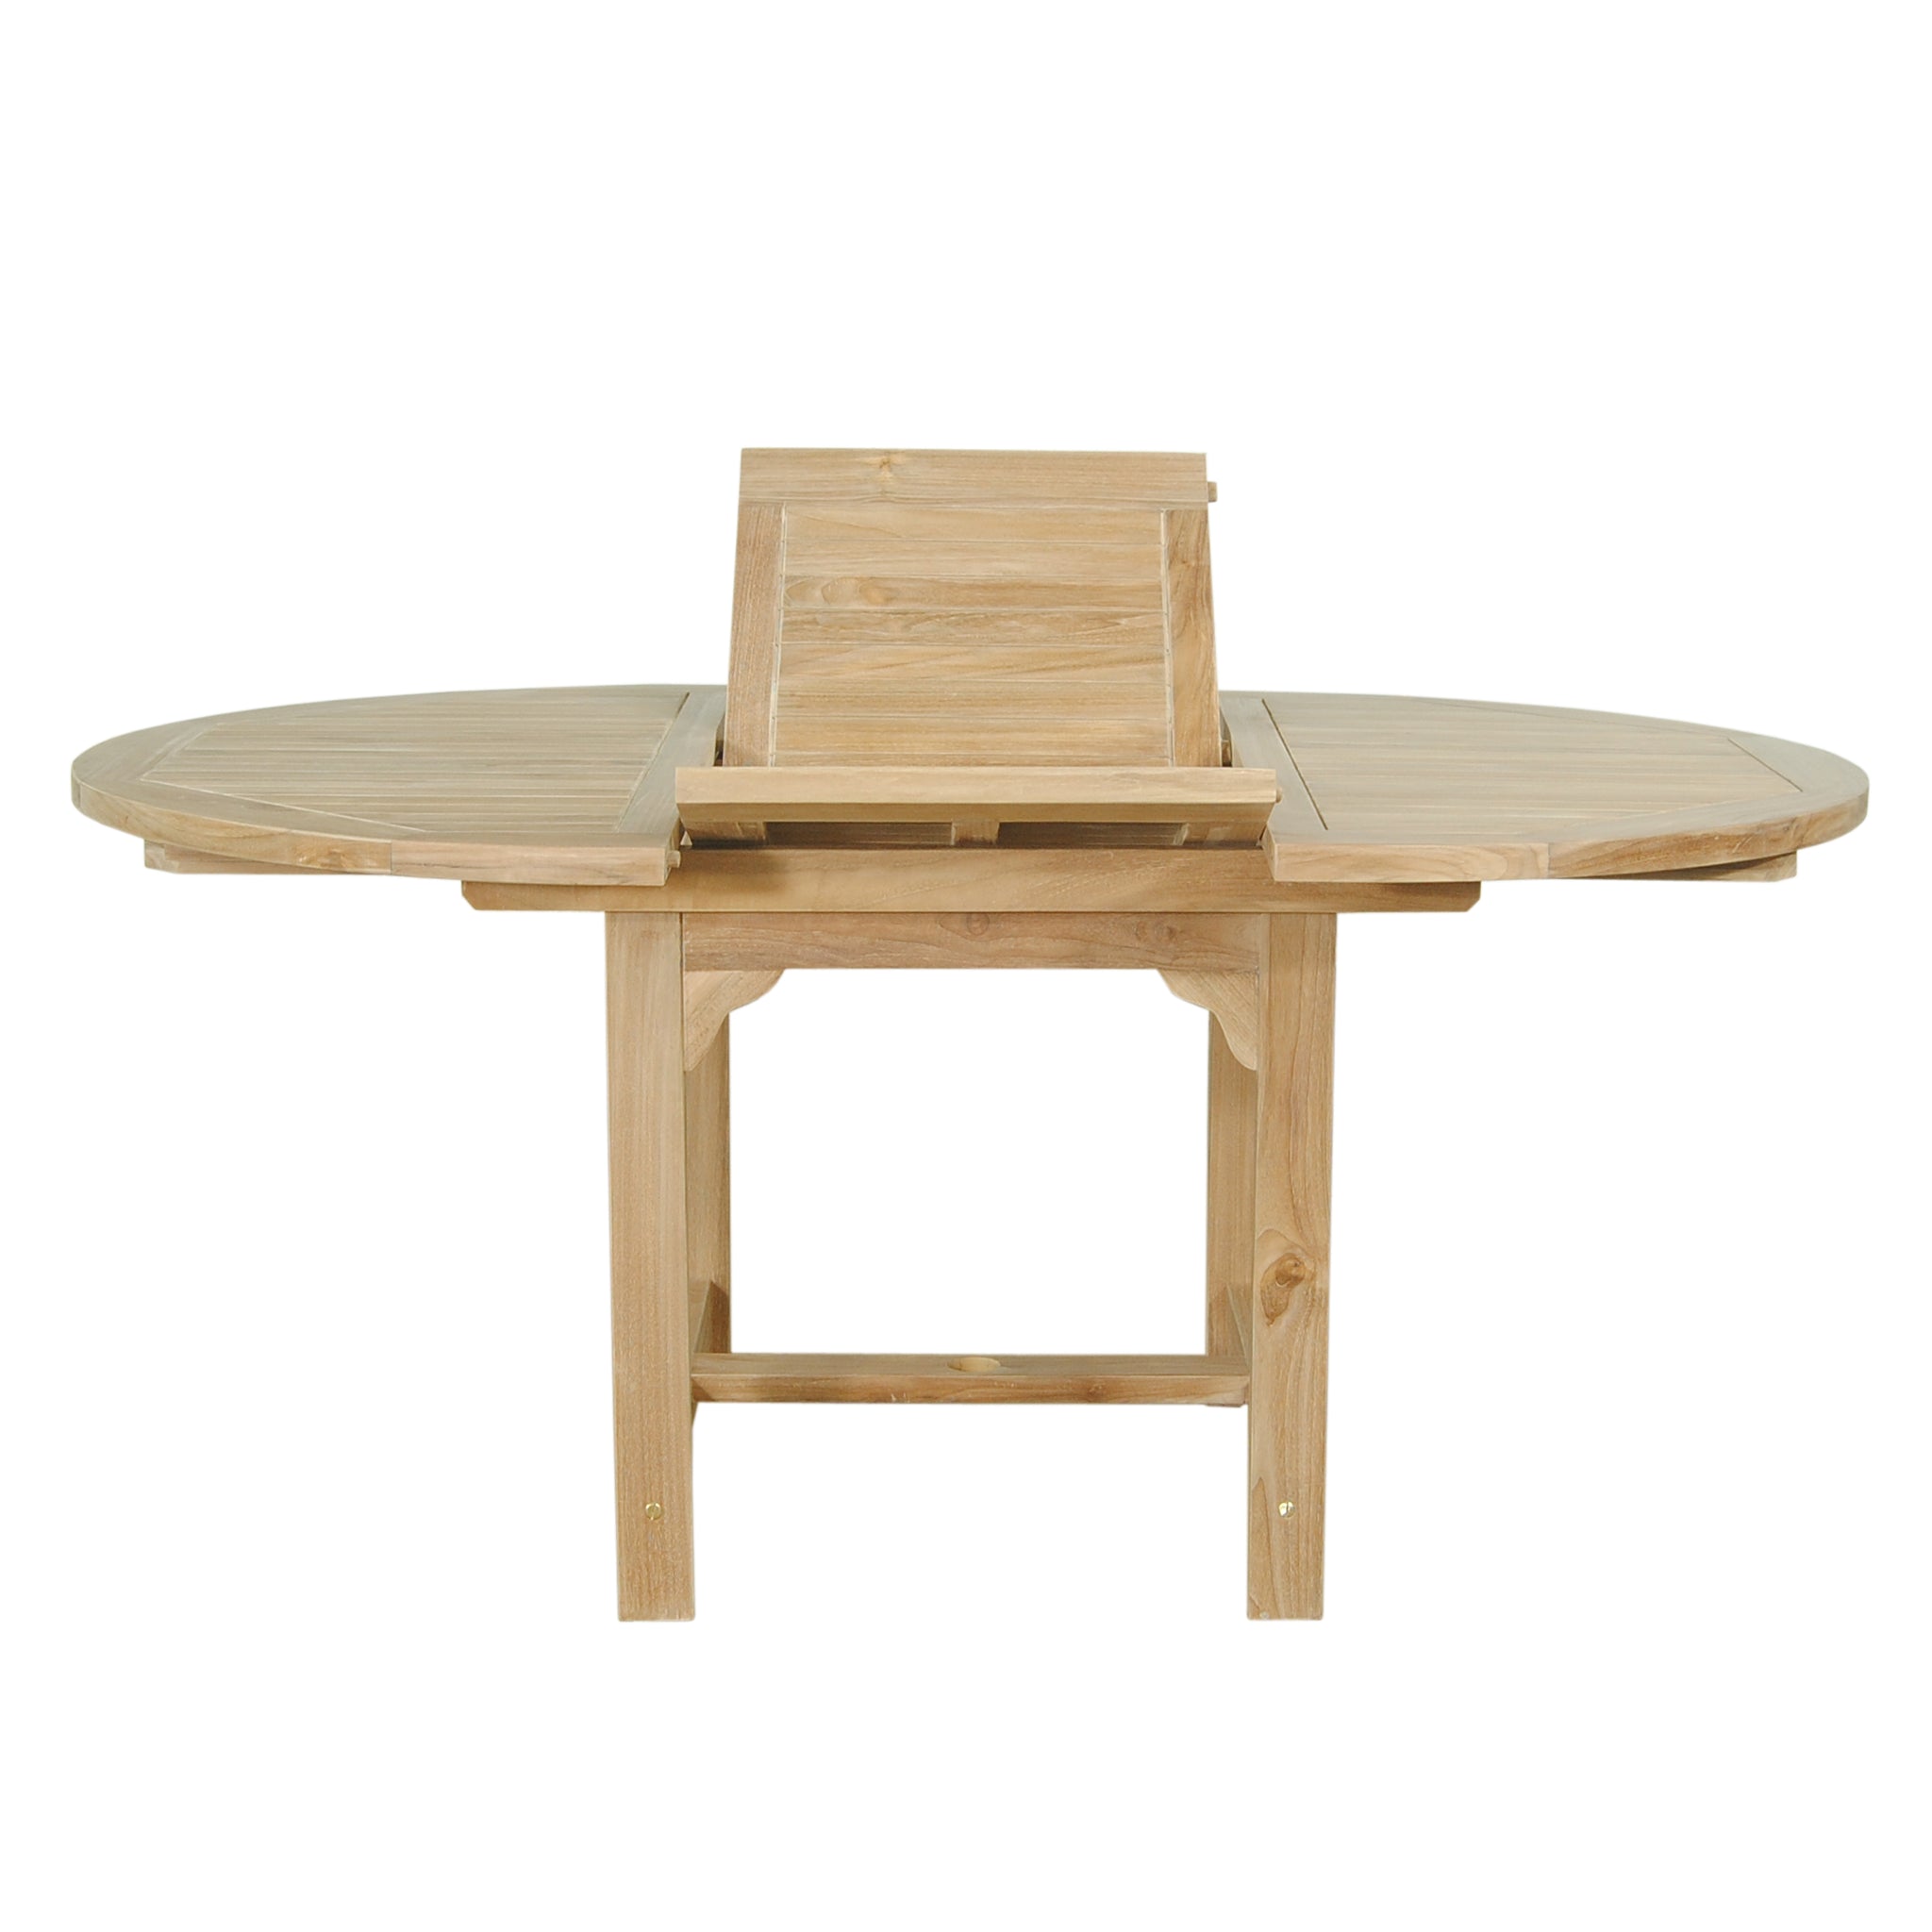 Anderson Teak Bahama 67" Oval Extension Table TBX-067V